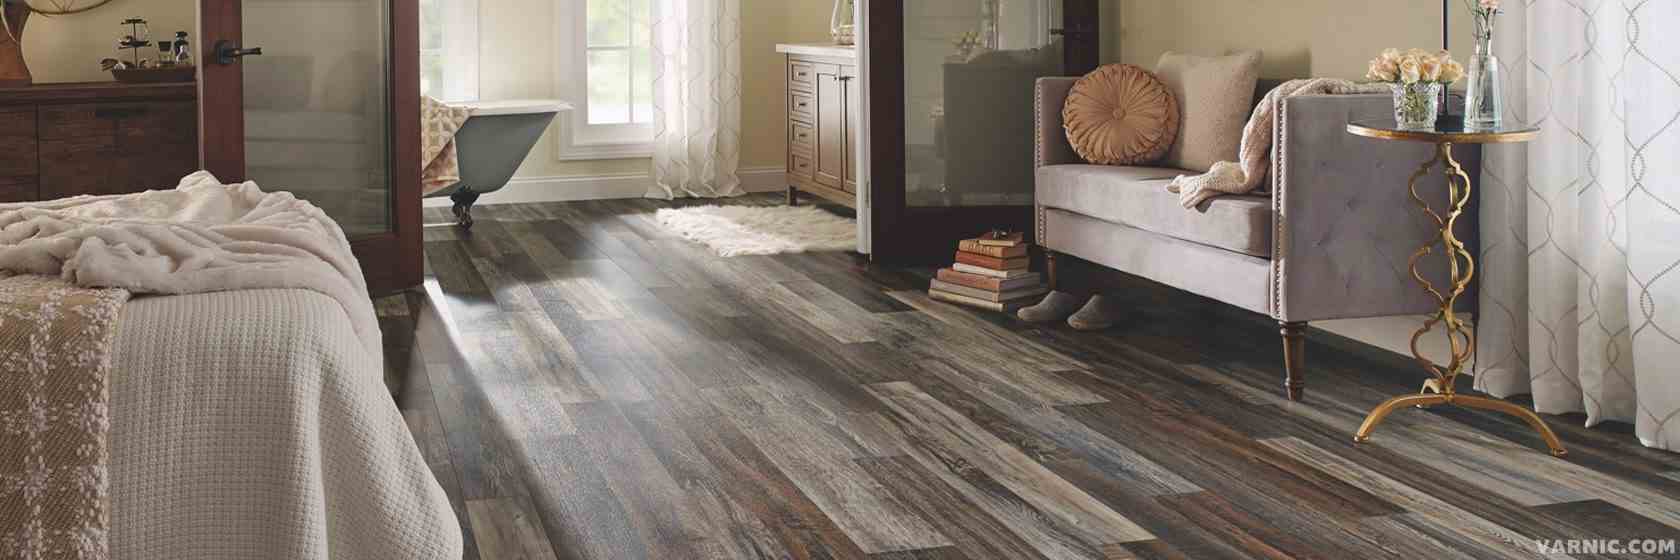 How to Combine Flooring Style With Home Decor | Varnic